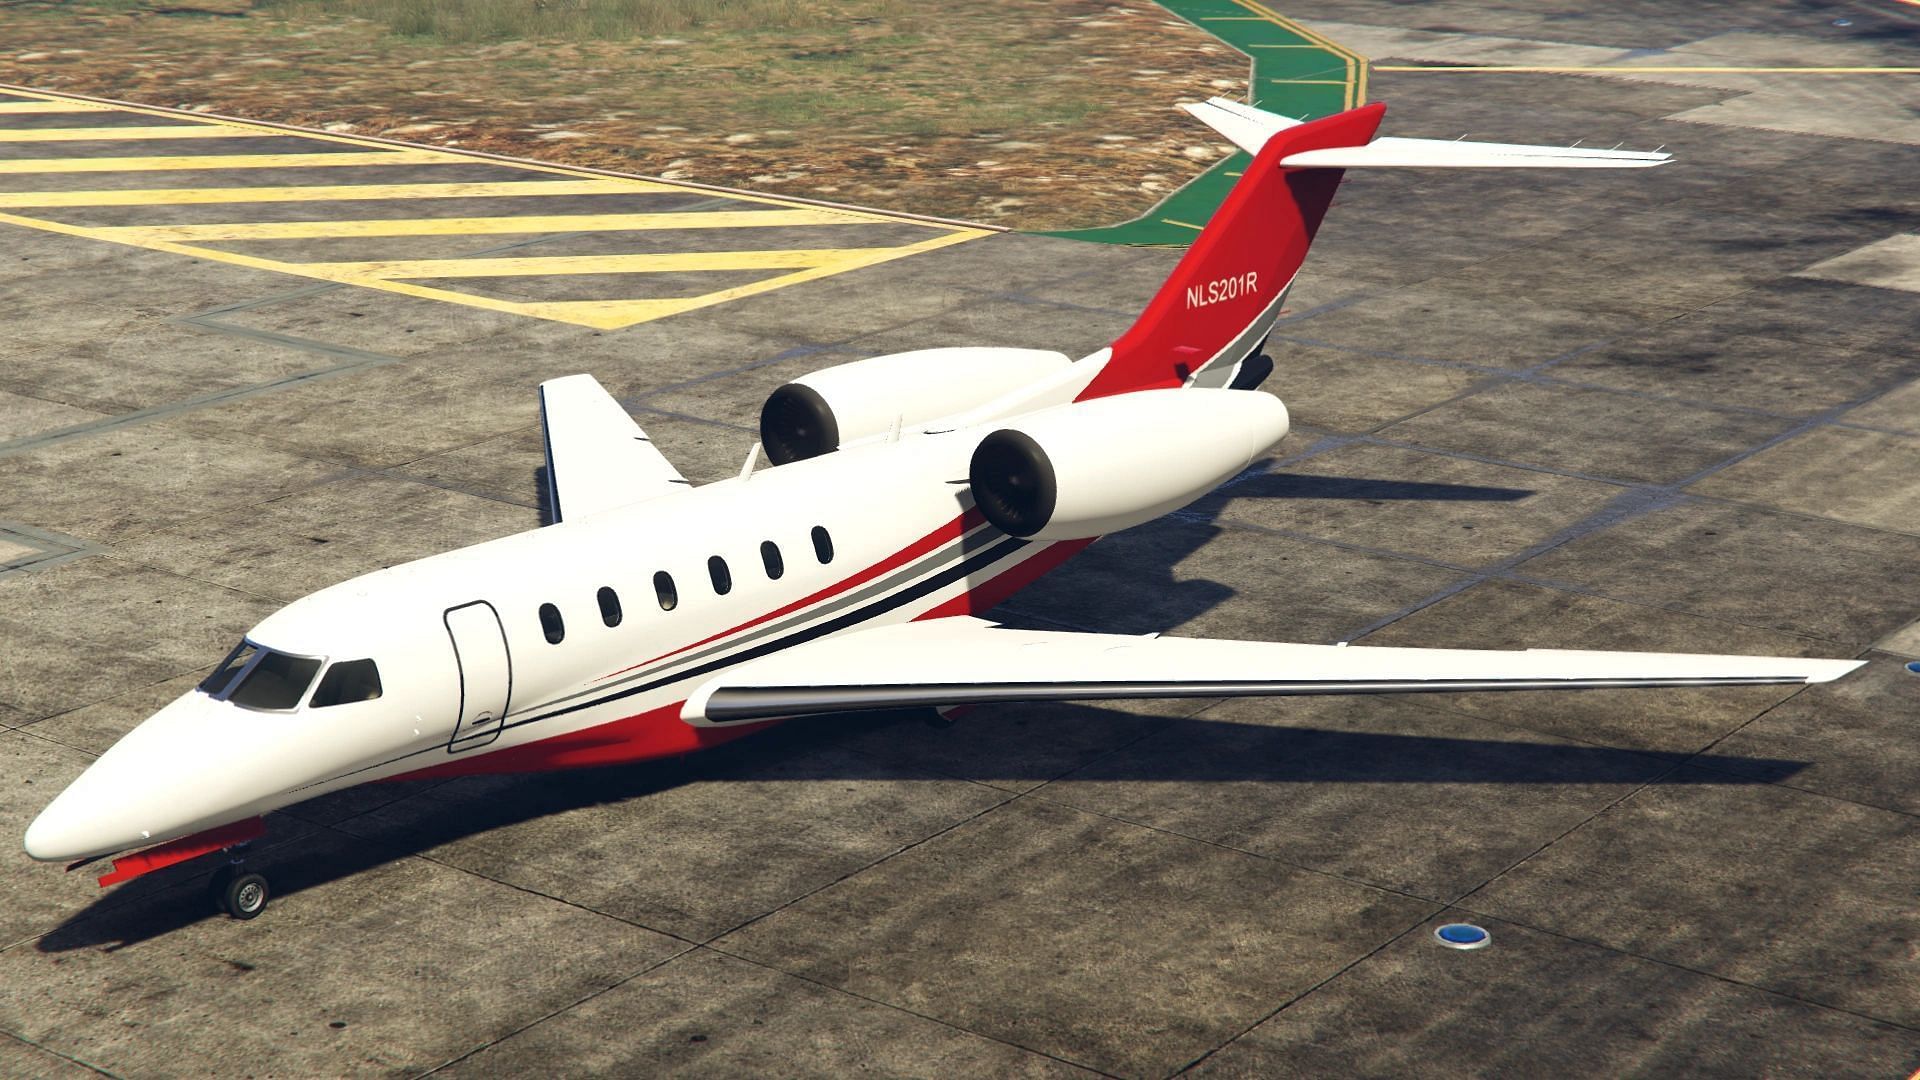 The Nimbus is a private jet in Grand Theft Auto Online (Image via Rockstar Games || GTA Wiki)